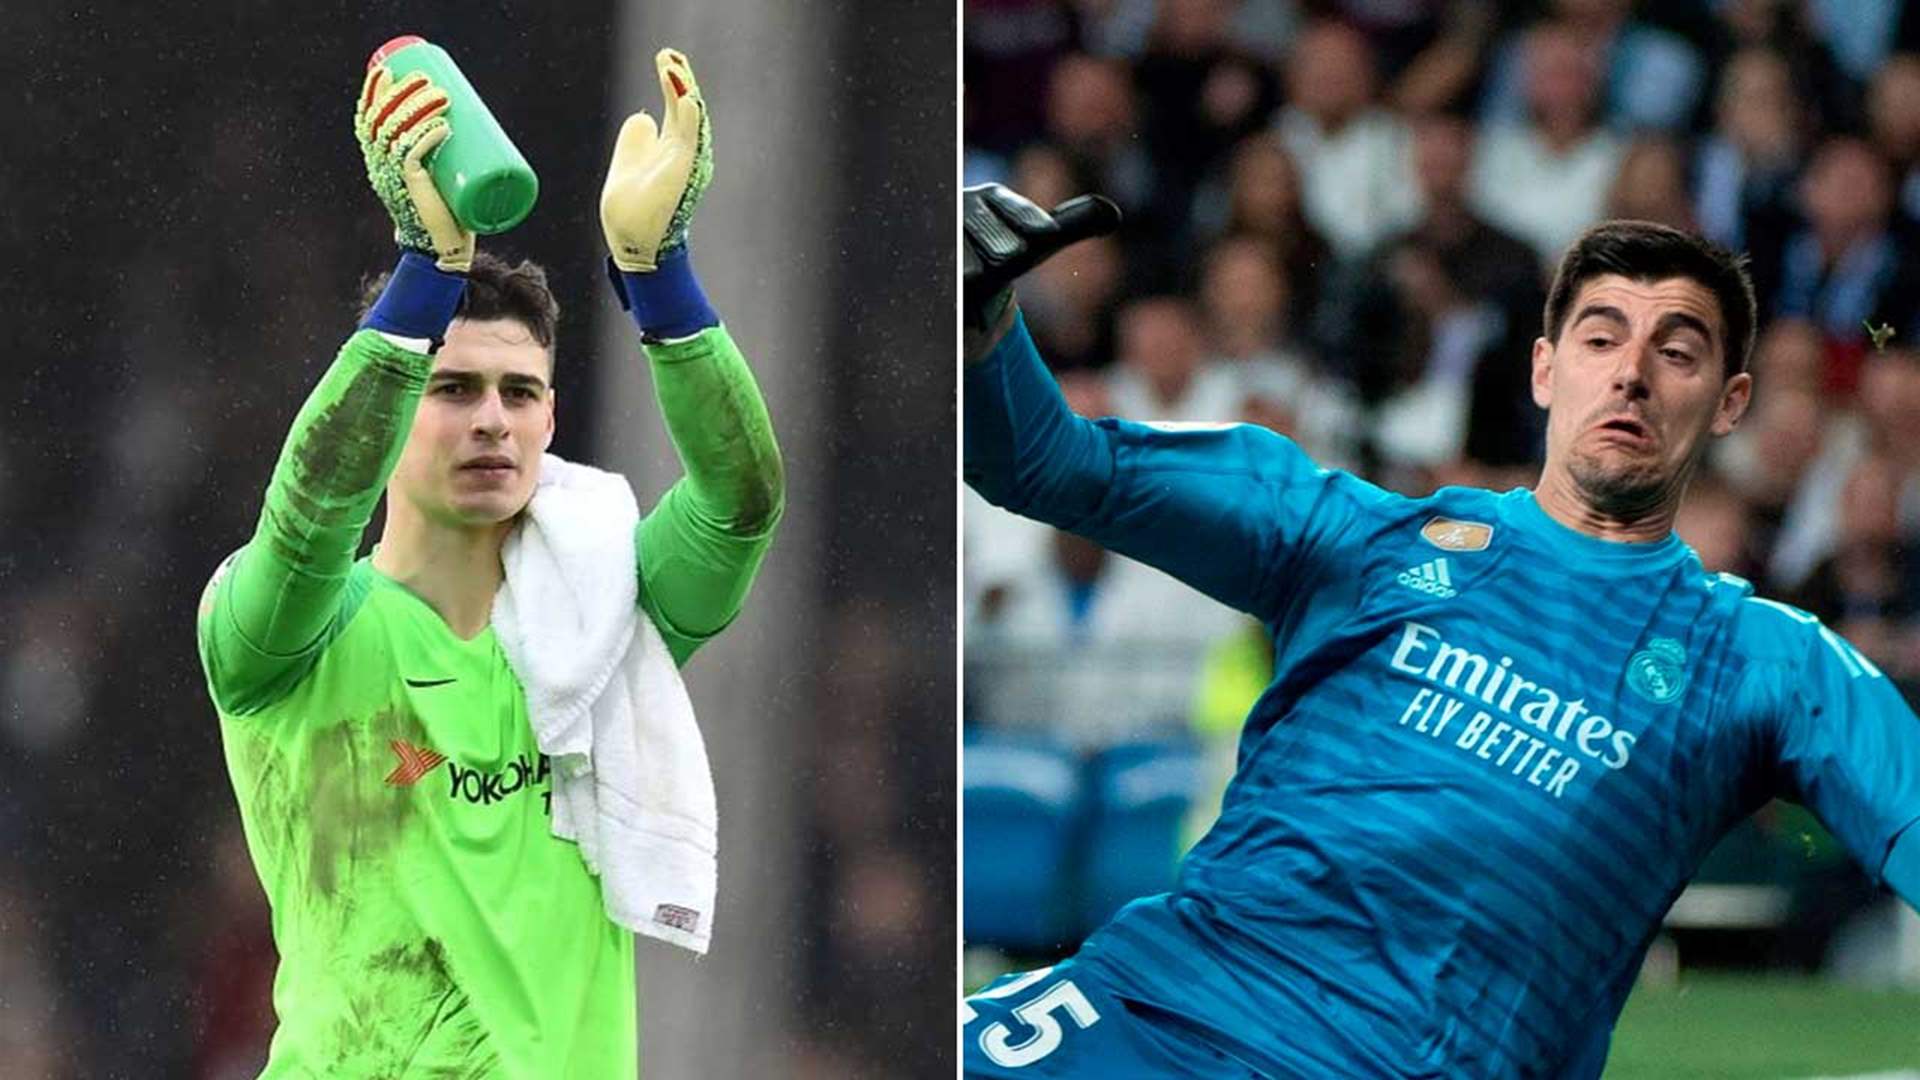 Kepa makes up for injured Courtois at Real Madrid